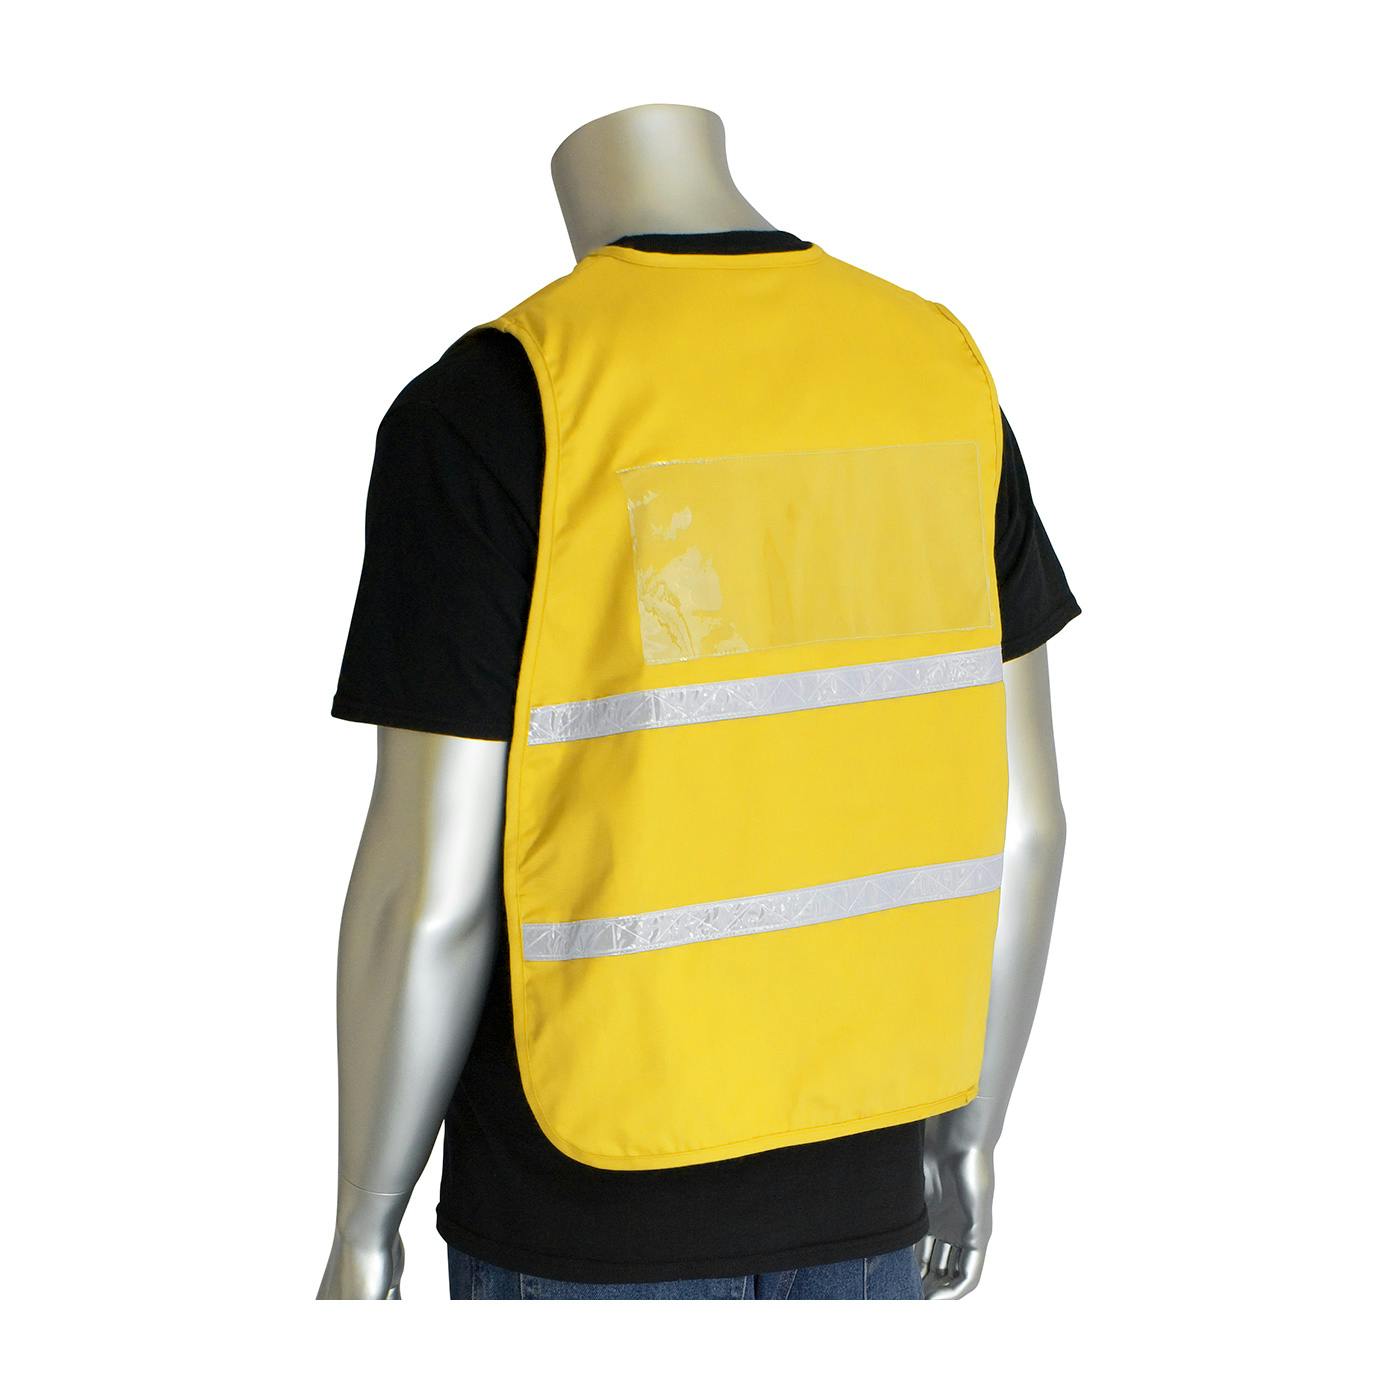 Non-ANSI Incident Command Vest - 100% Polyester, Yellow (300-1510)